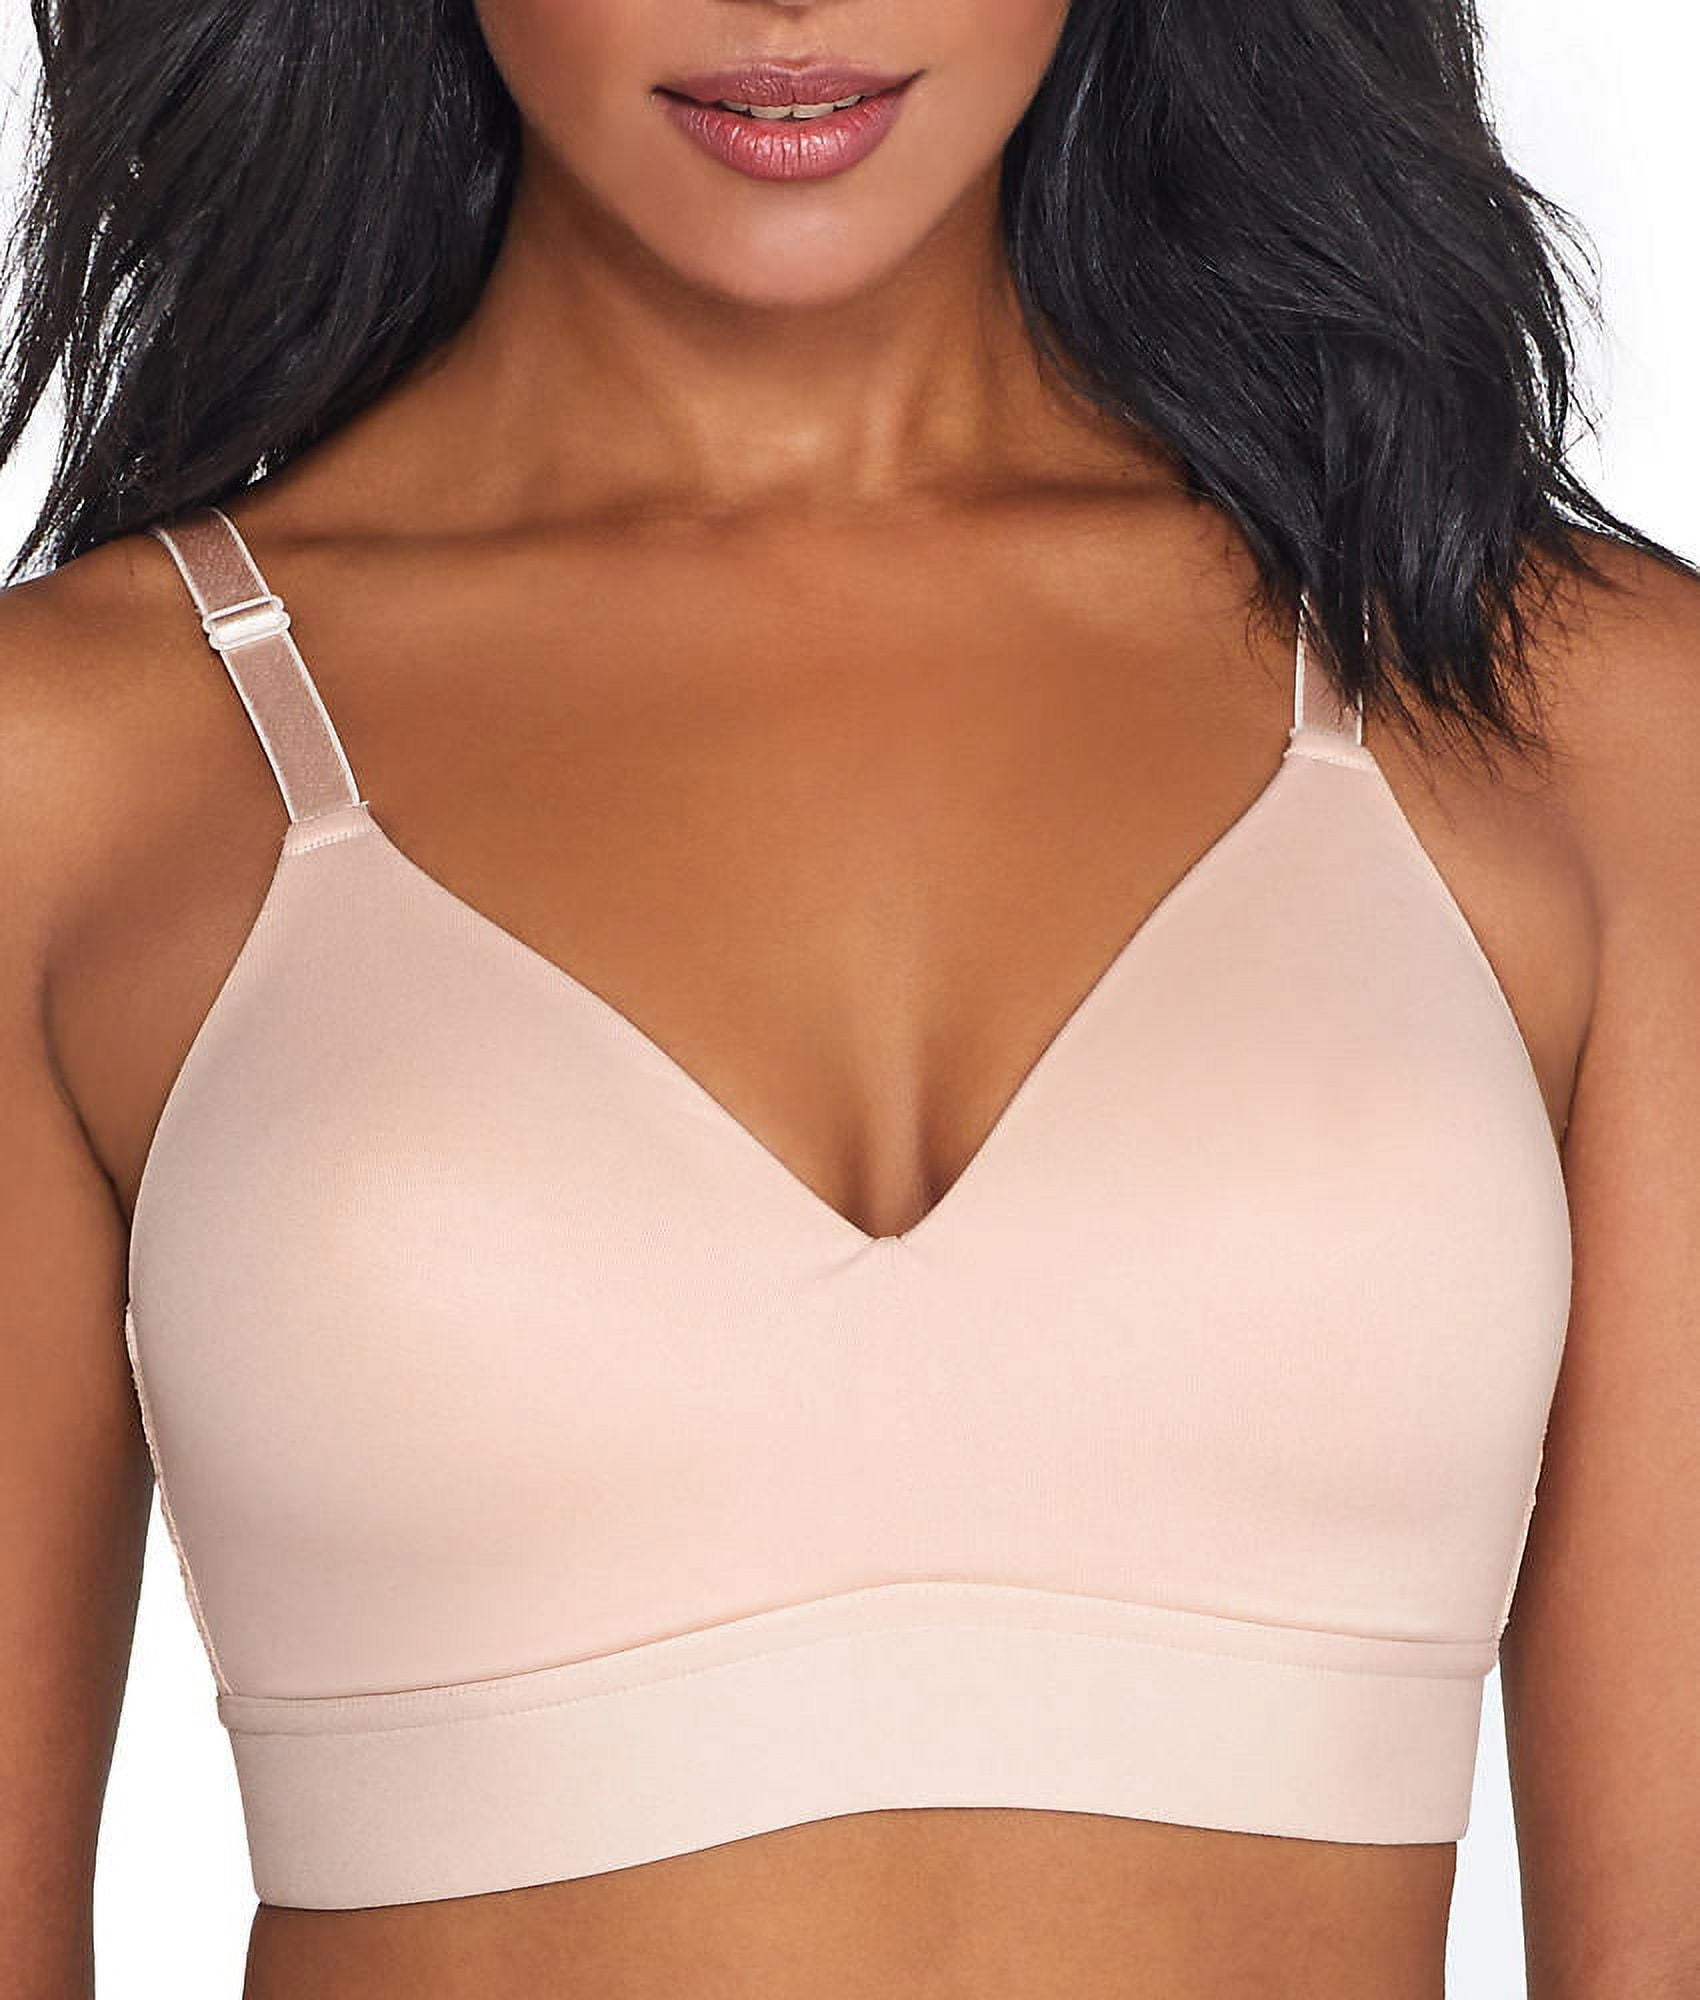 Paramour by Felina, Ariel Wire Free Bralette, Contour